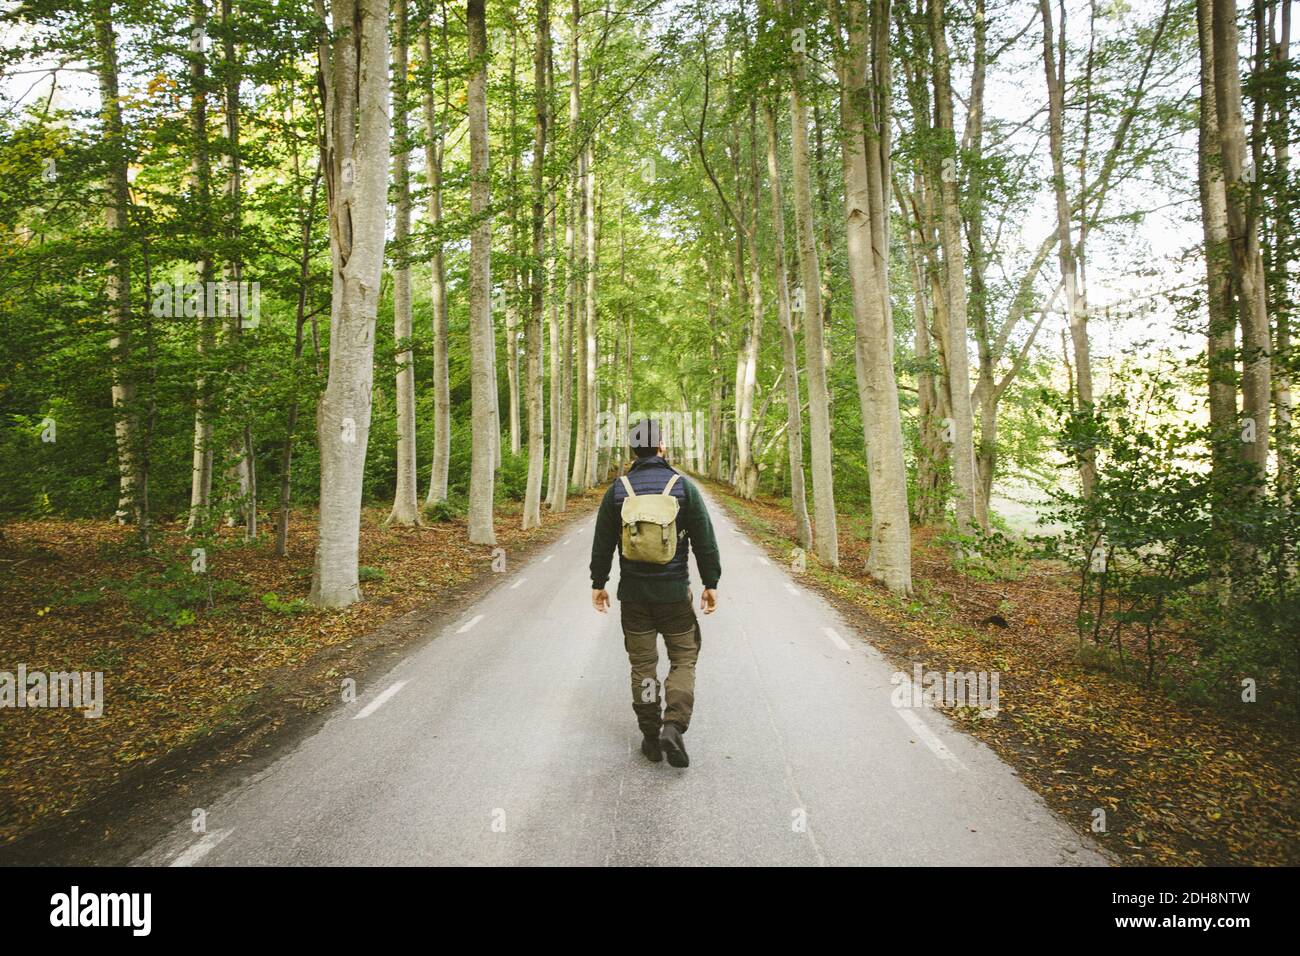 Rear view of hiker walking on road amidst trees Stock Photo